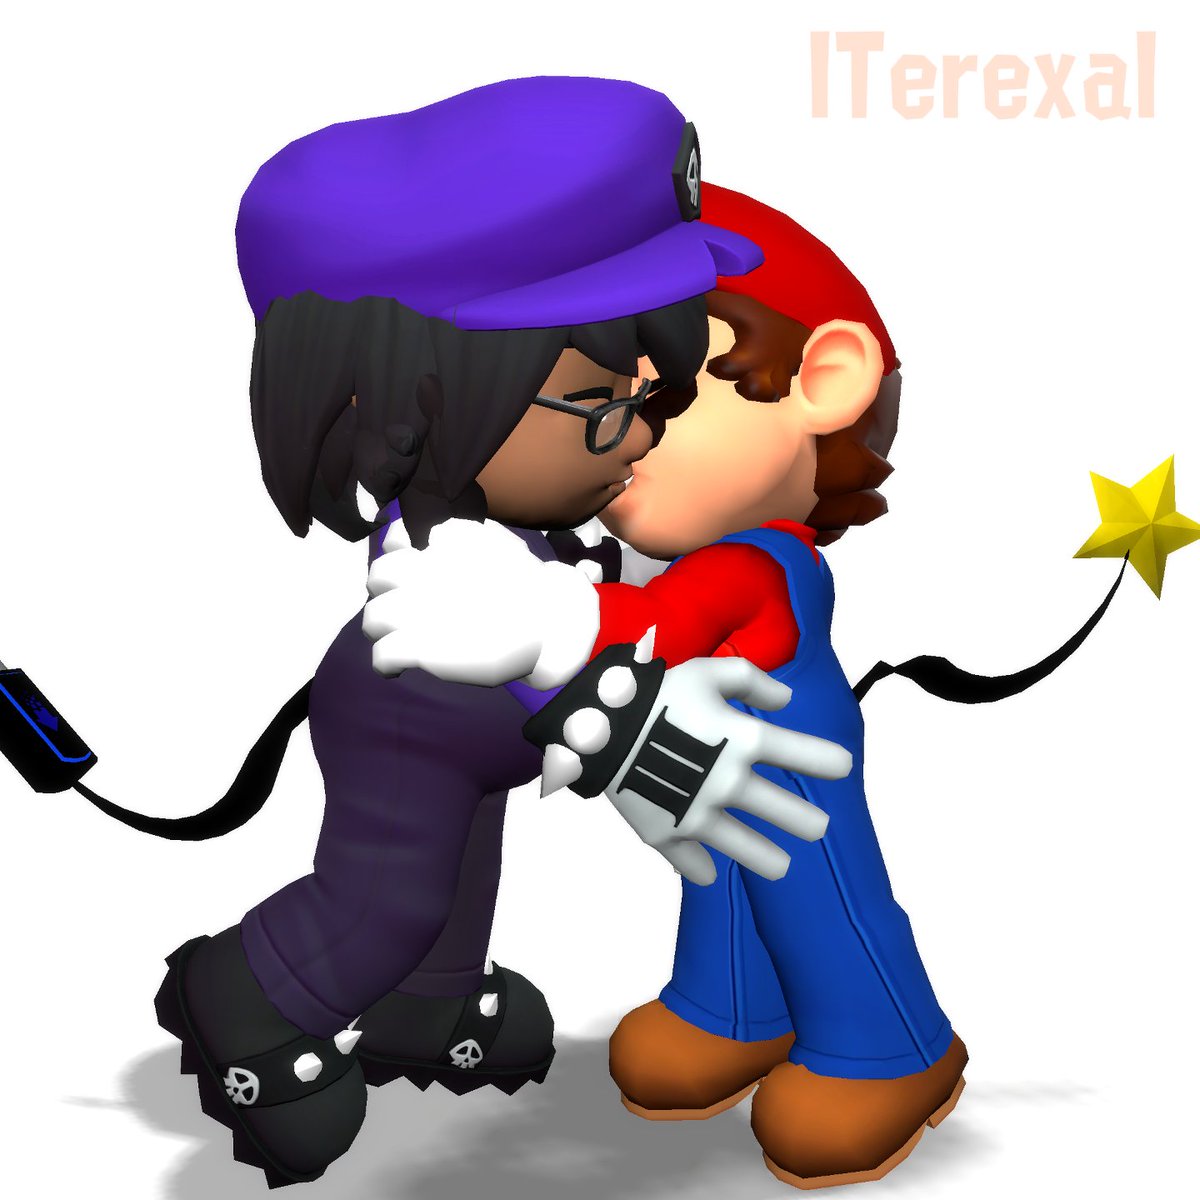 coughs this one up and leaves (this was literally my first time making characters kiss HELP..) #smg4 #smg3 #smg4mario #mar3 #marioxsmg3 #smg3xmario #gmod